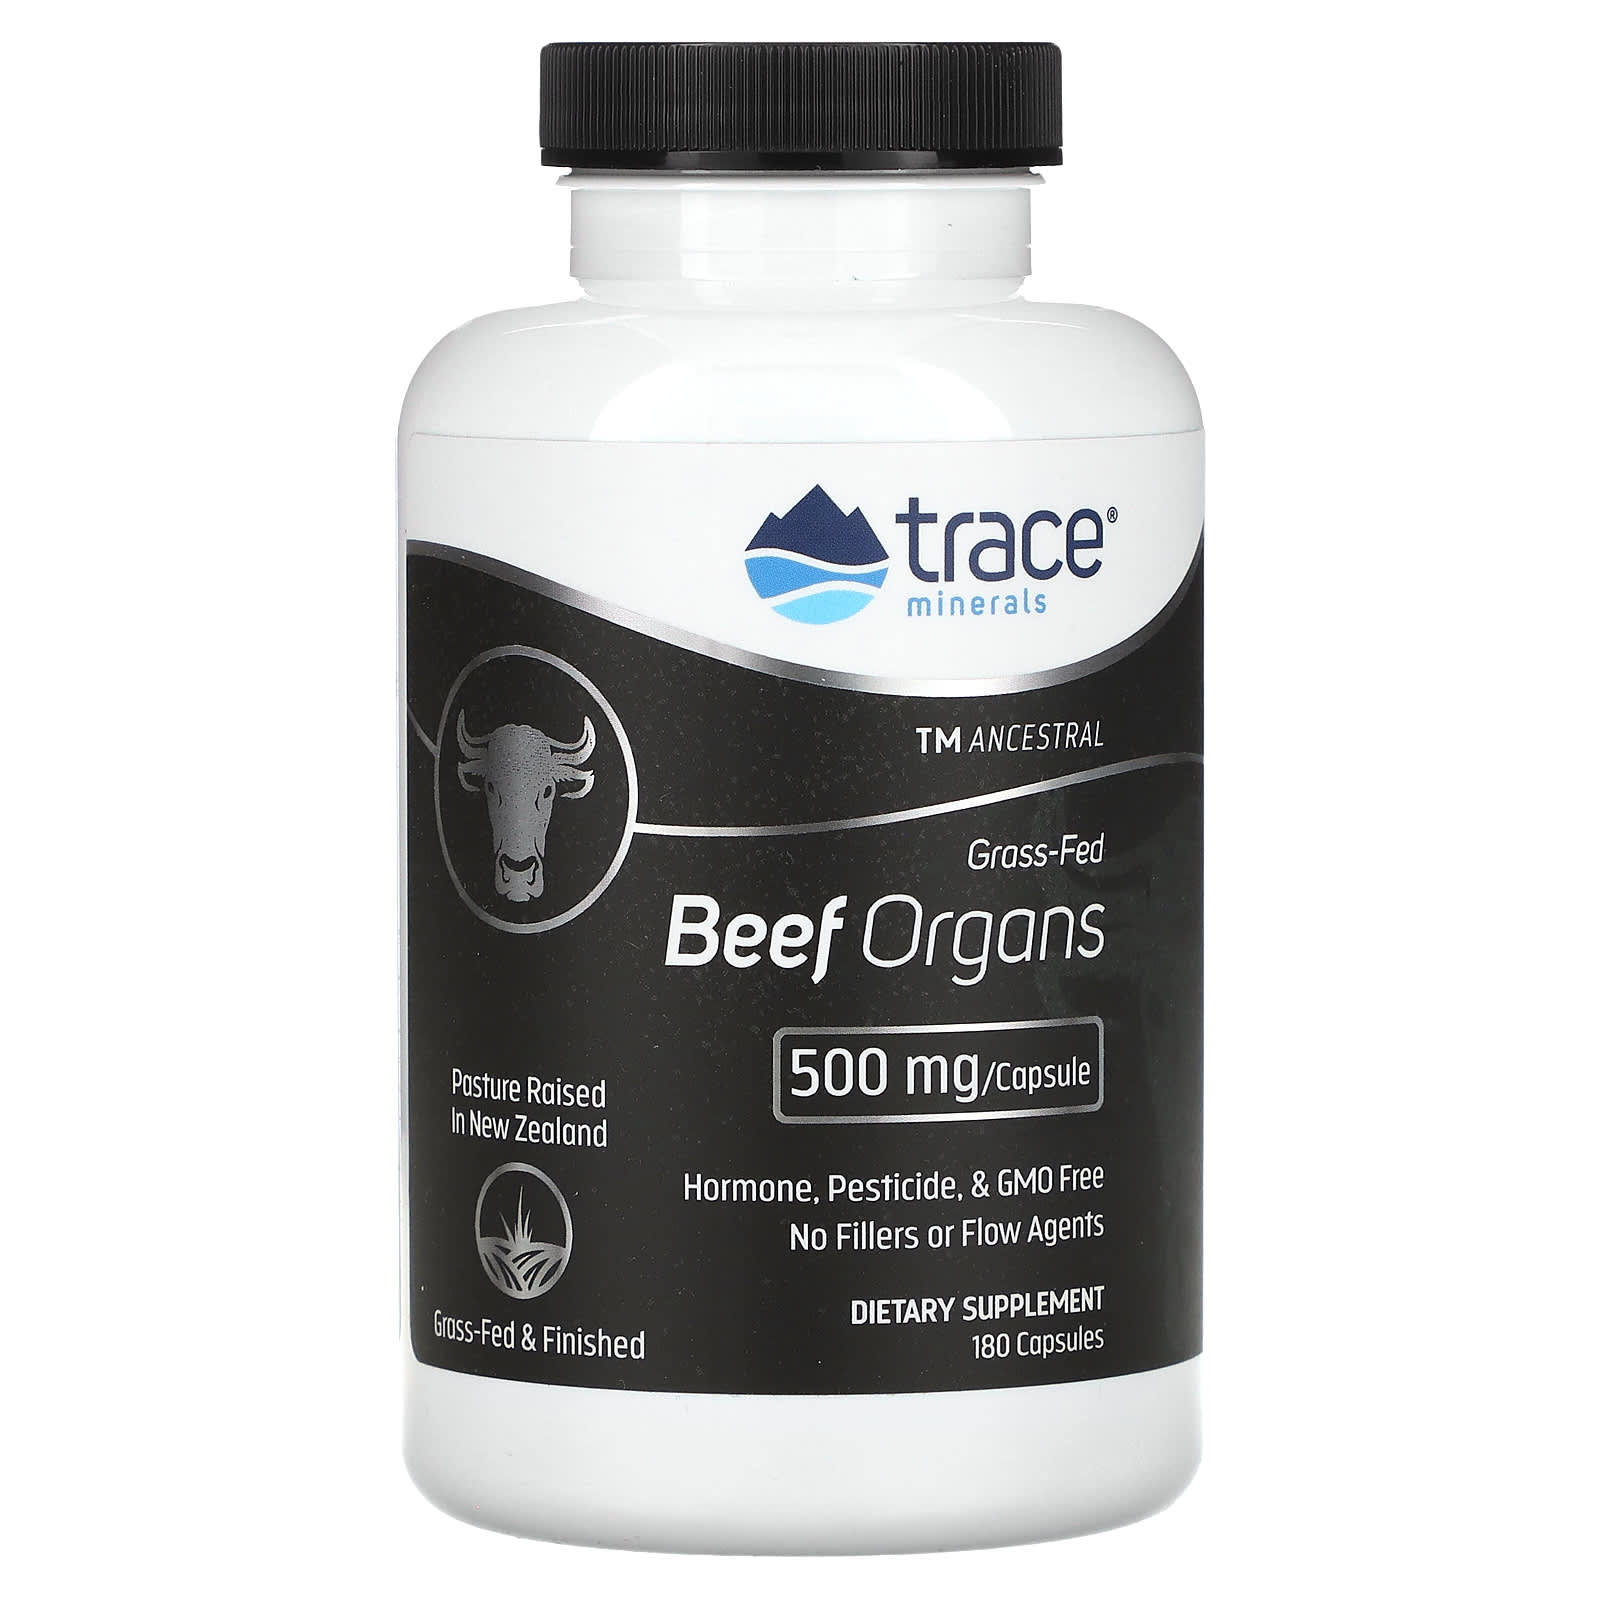 Trace Minerals ®, TM Ancestral, Grass-Fed Beef Organs, 500 mg, 180 Capsules